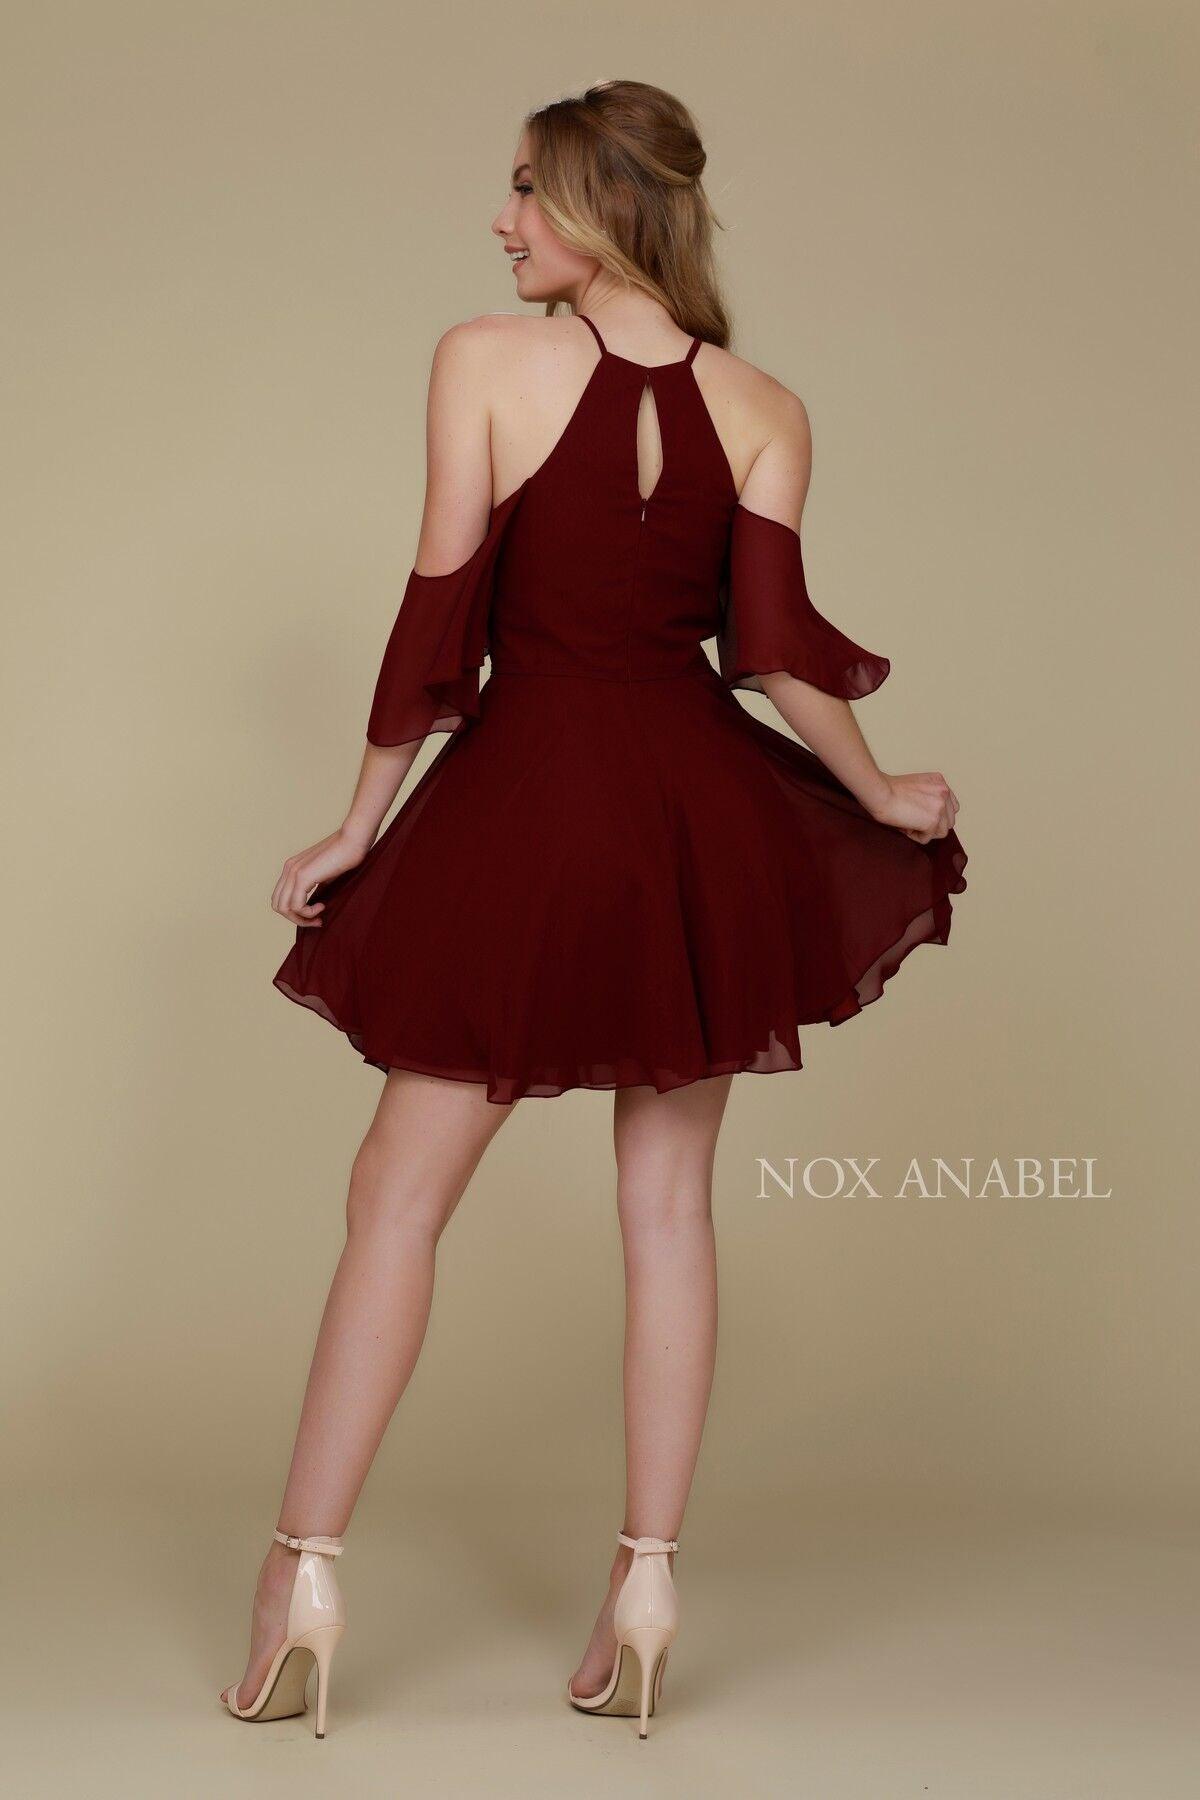 Homecoming Short Cocktail Party Chiffon Dress - The Dress Outlet Nox Anabel